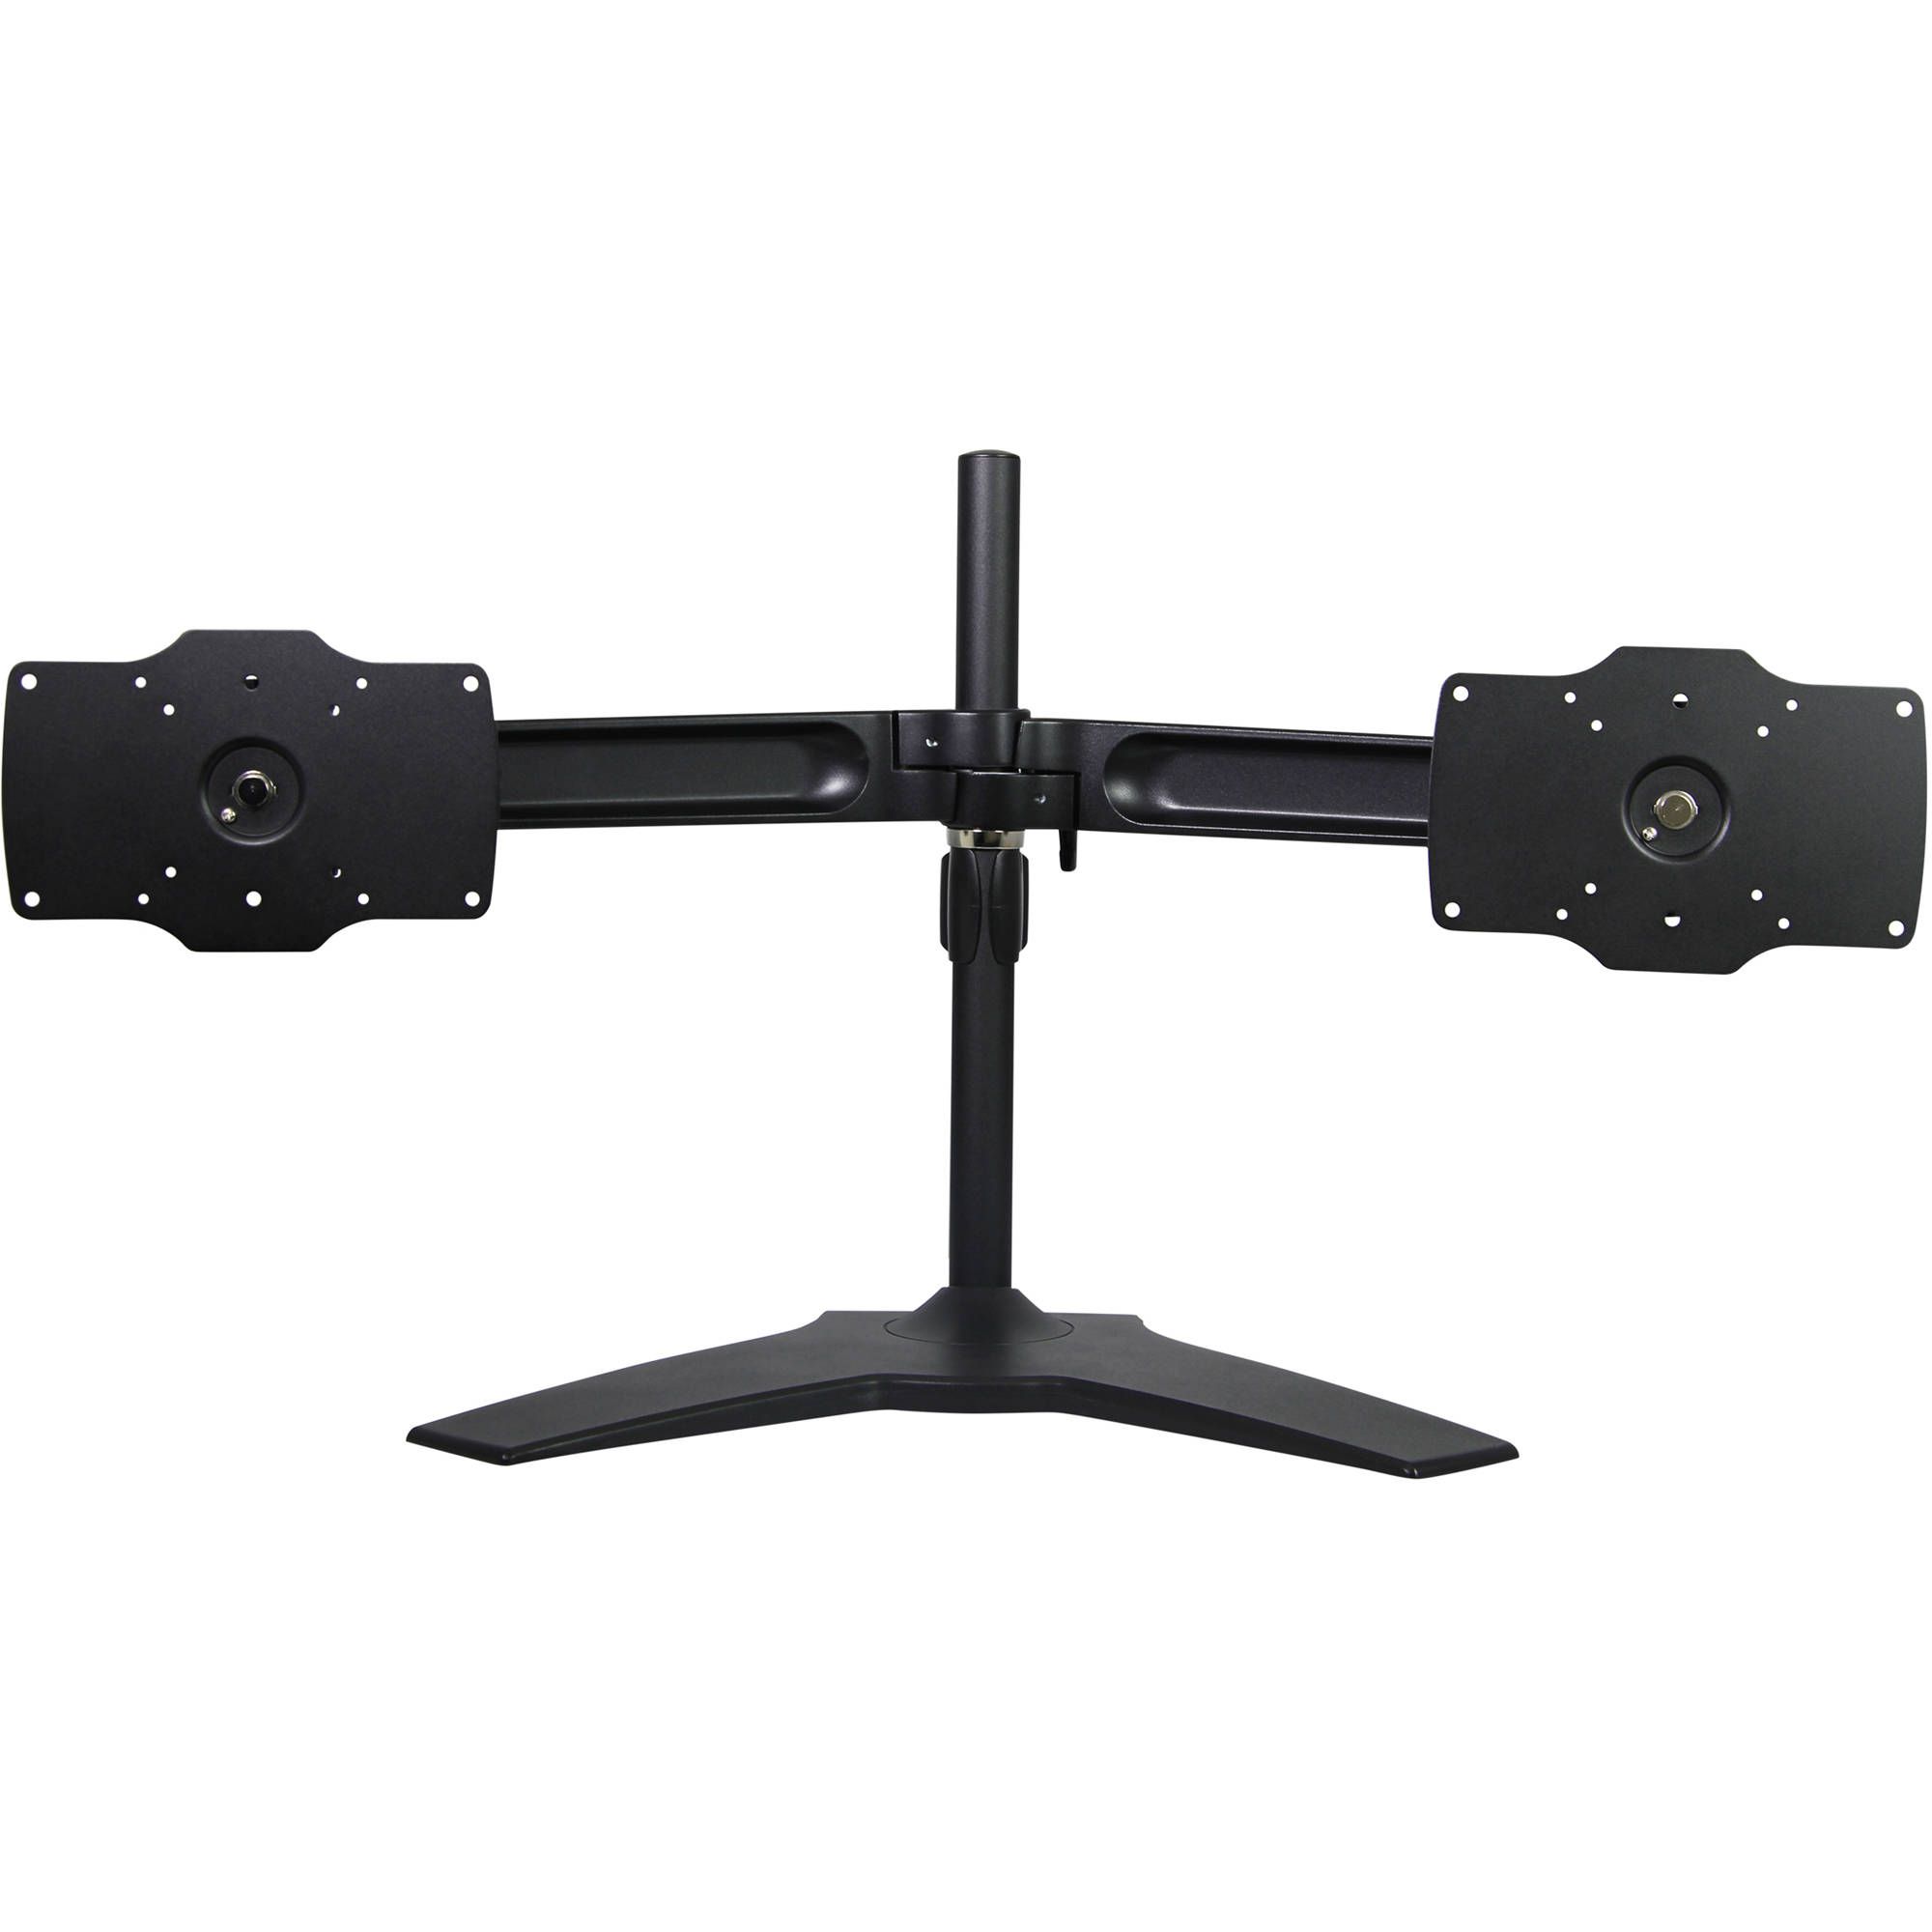 Widely Used Dyconn Raven De732s S Double Tv / Monitor Desk Mount Stand Raven Inside Dual Tv Stands (View 10 of 20)